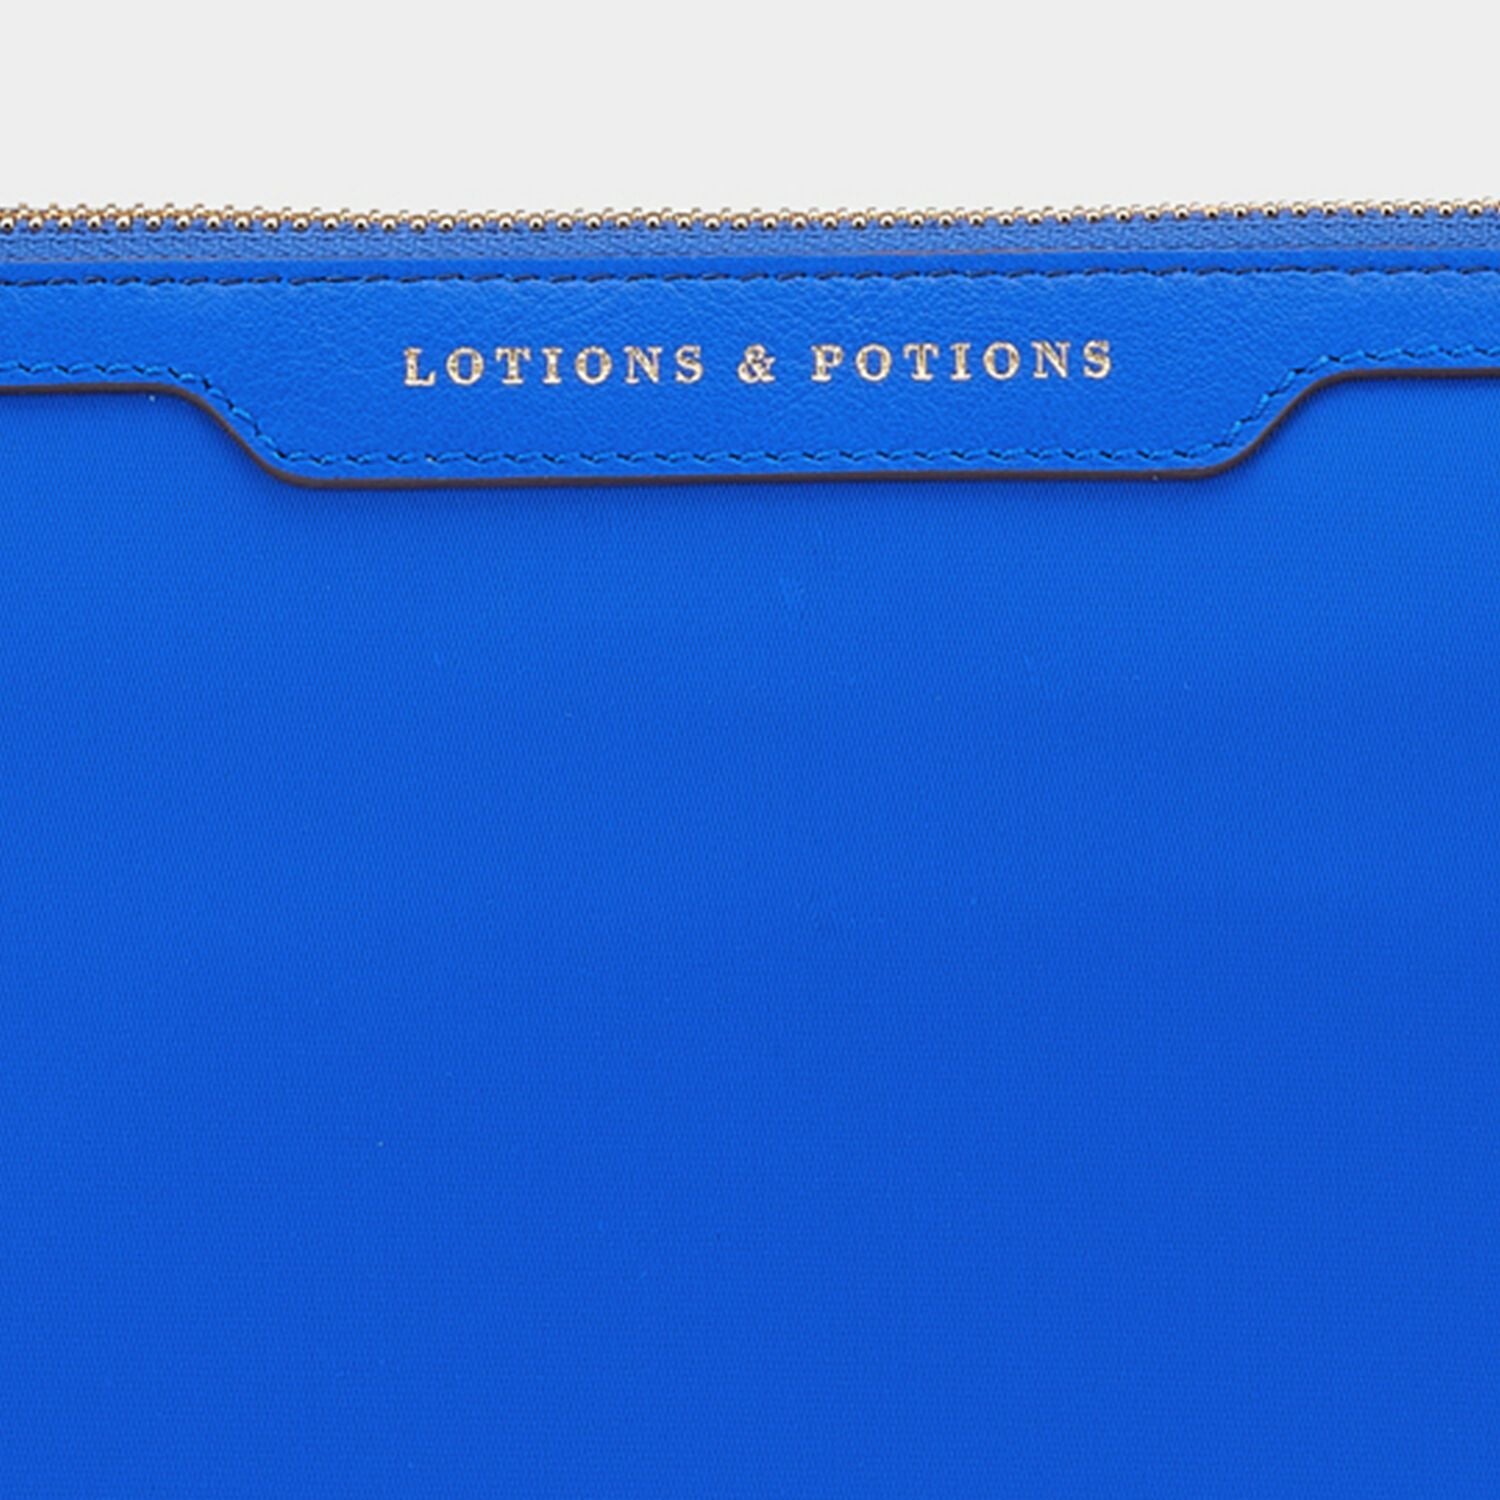 「Lotions and Potions」ポーチ